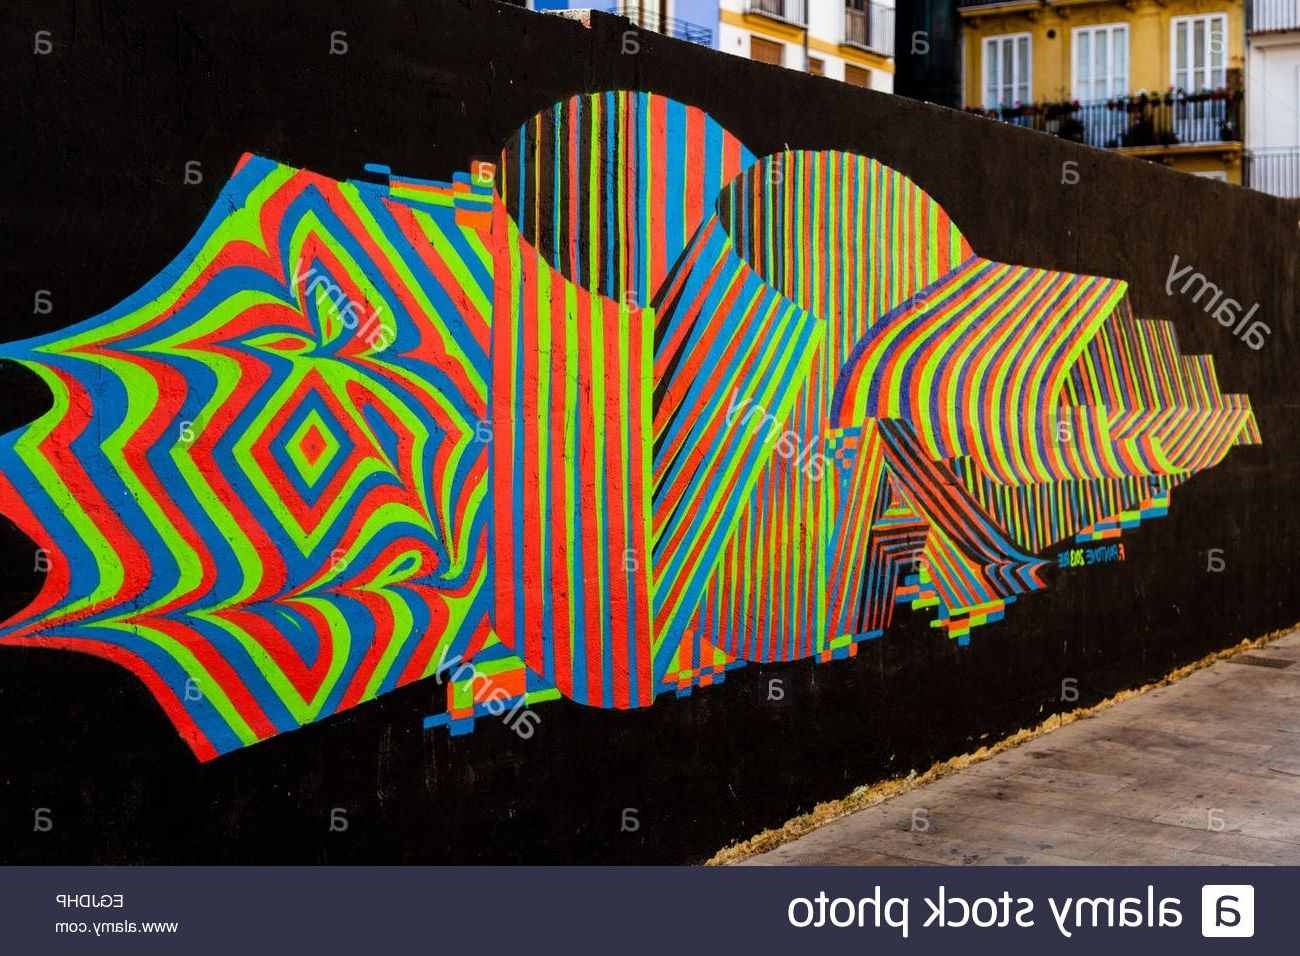 Most Popular Colorful Abstract Lines On The Public Wall, Art Or Graffiti Within Abstract Graffiti Wall Art (View 8 of 15)